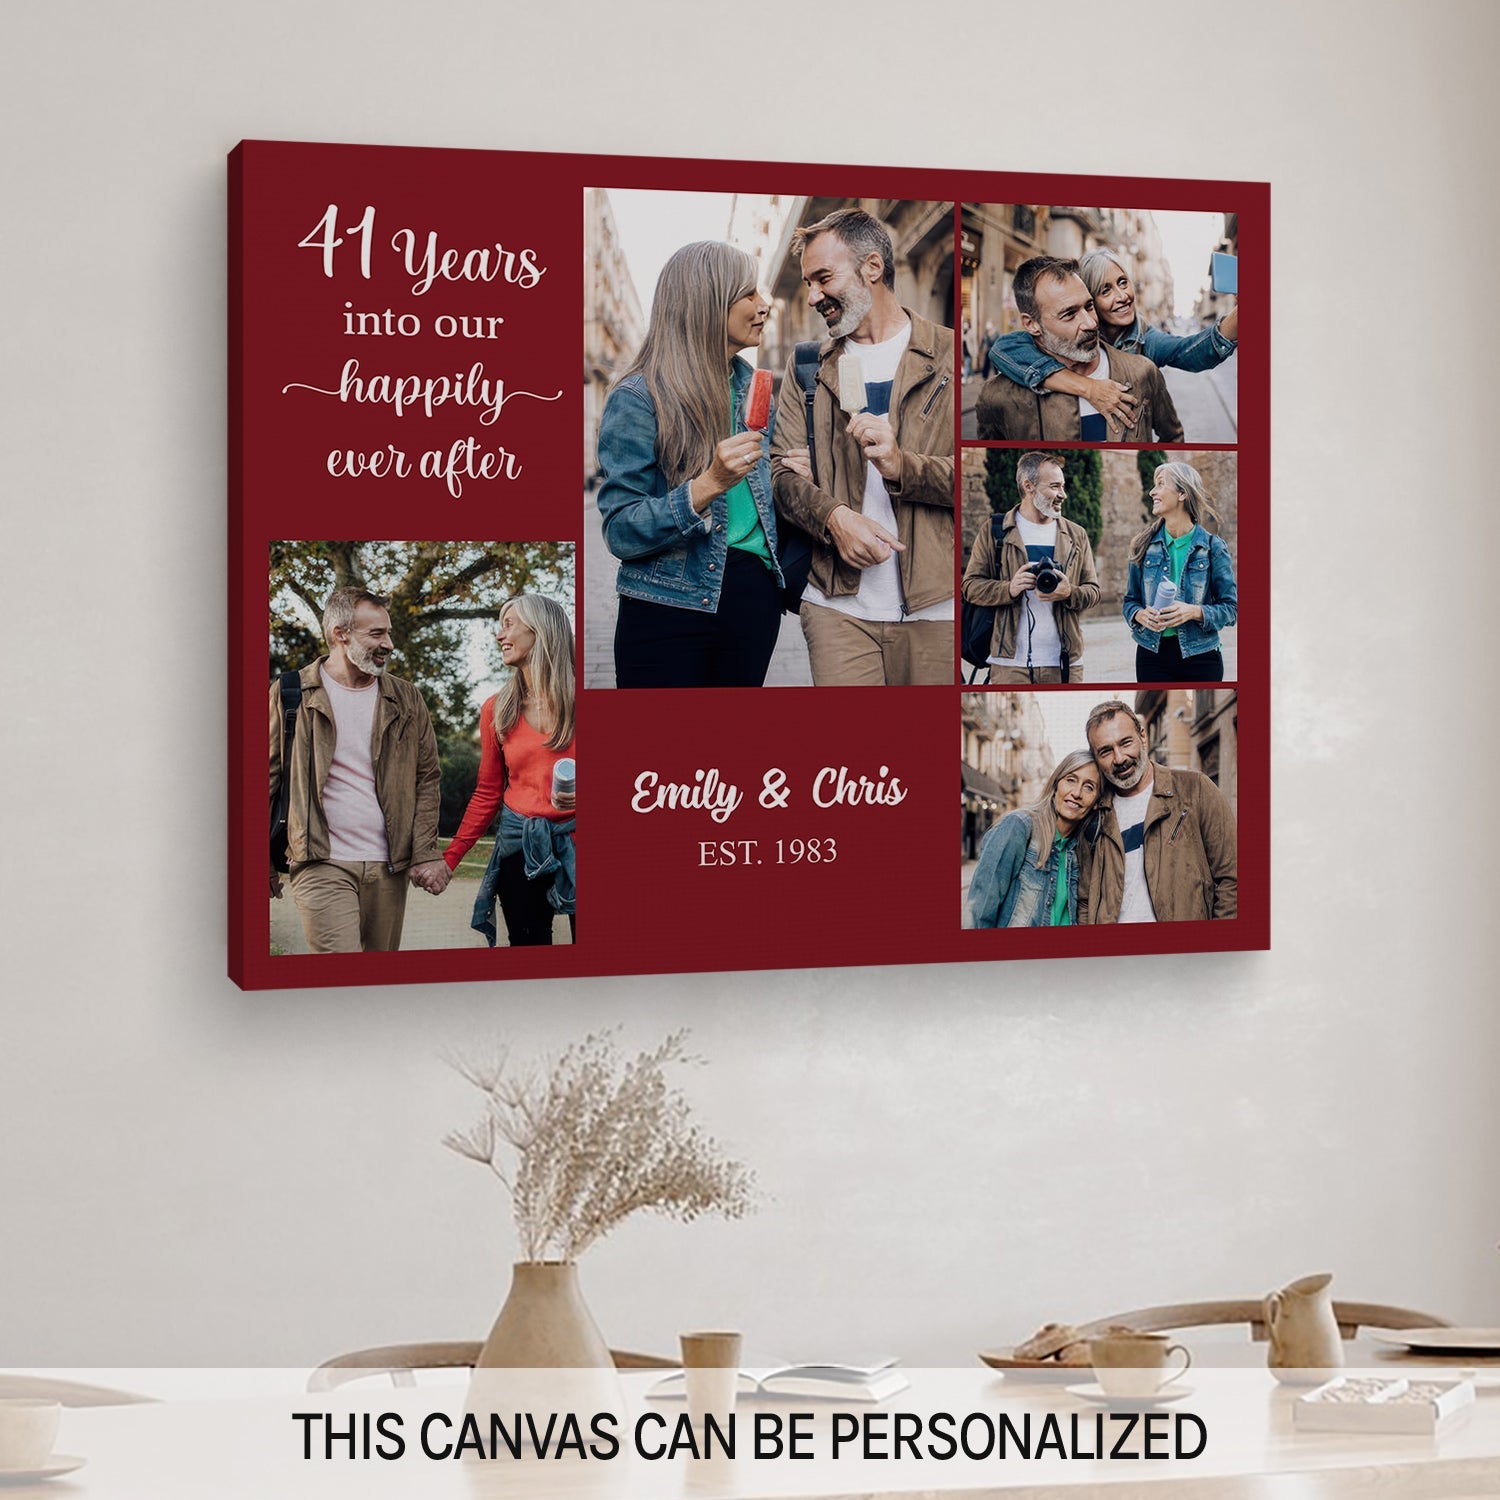 41 Years Into Our Happily Ever After - Personalized 41 Year Anniversary gift For Parents, Husband or Wife - Custom Canvas Print - MyMindfulGifts